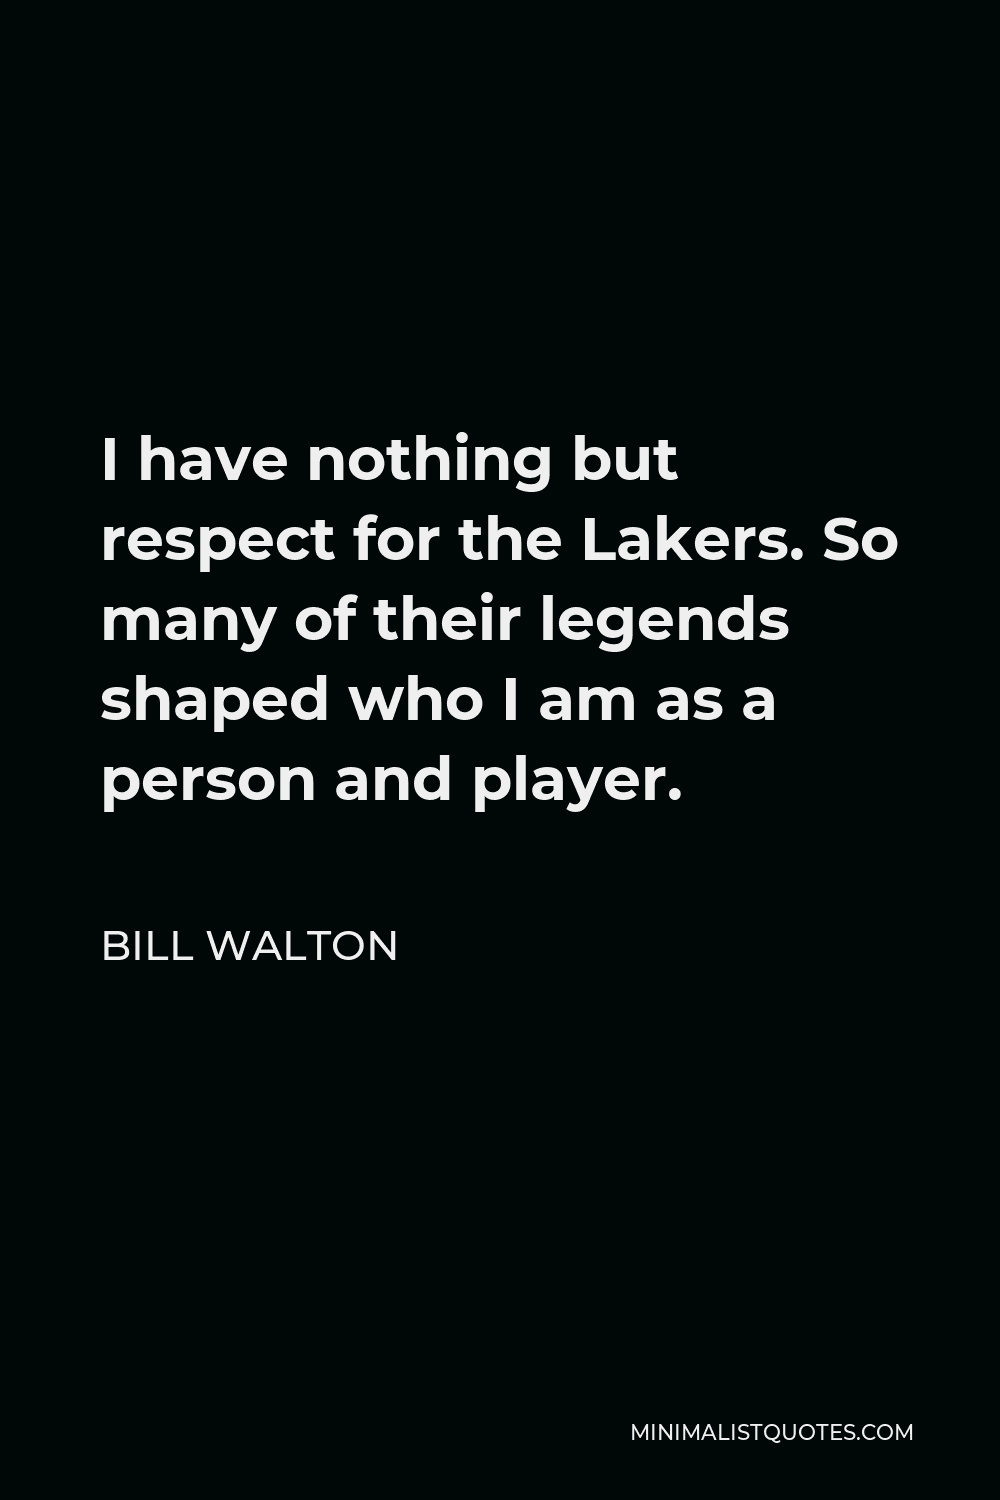 Bill Walton Quote - I have nothing but respect for the Lakers. So many of their legends shaped who I am as a person and player.